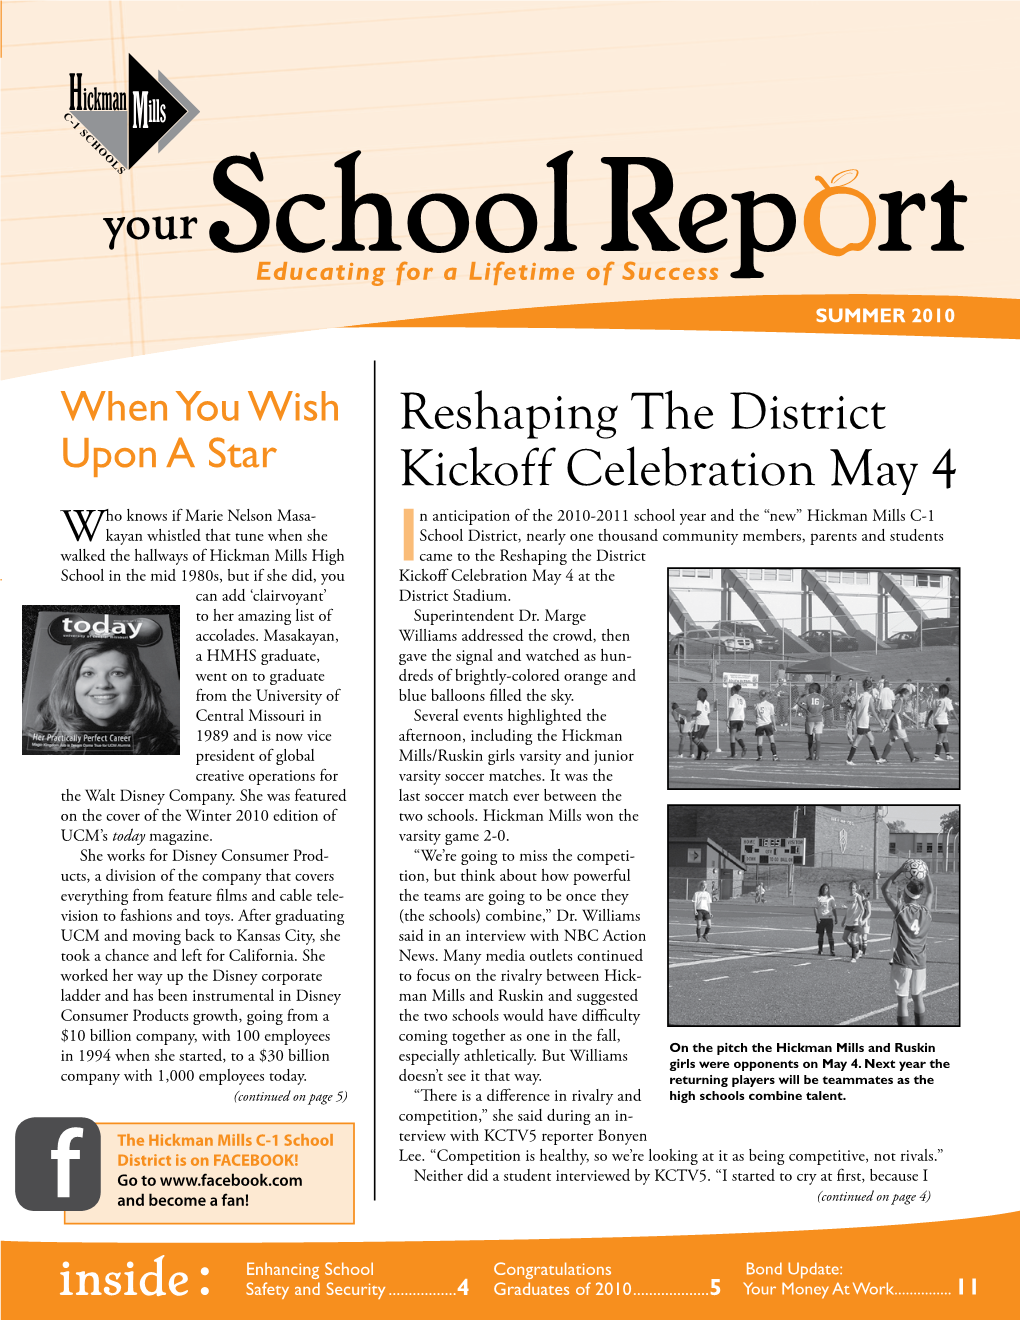 Reshaping the District Kickoff Celebration May 4